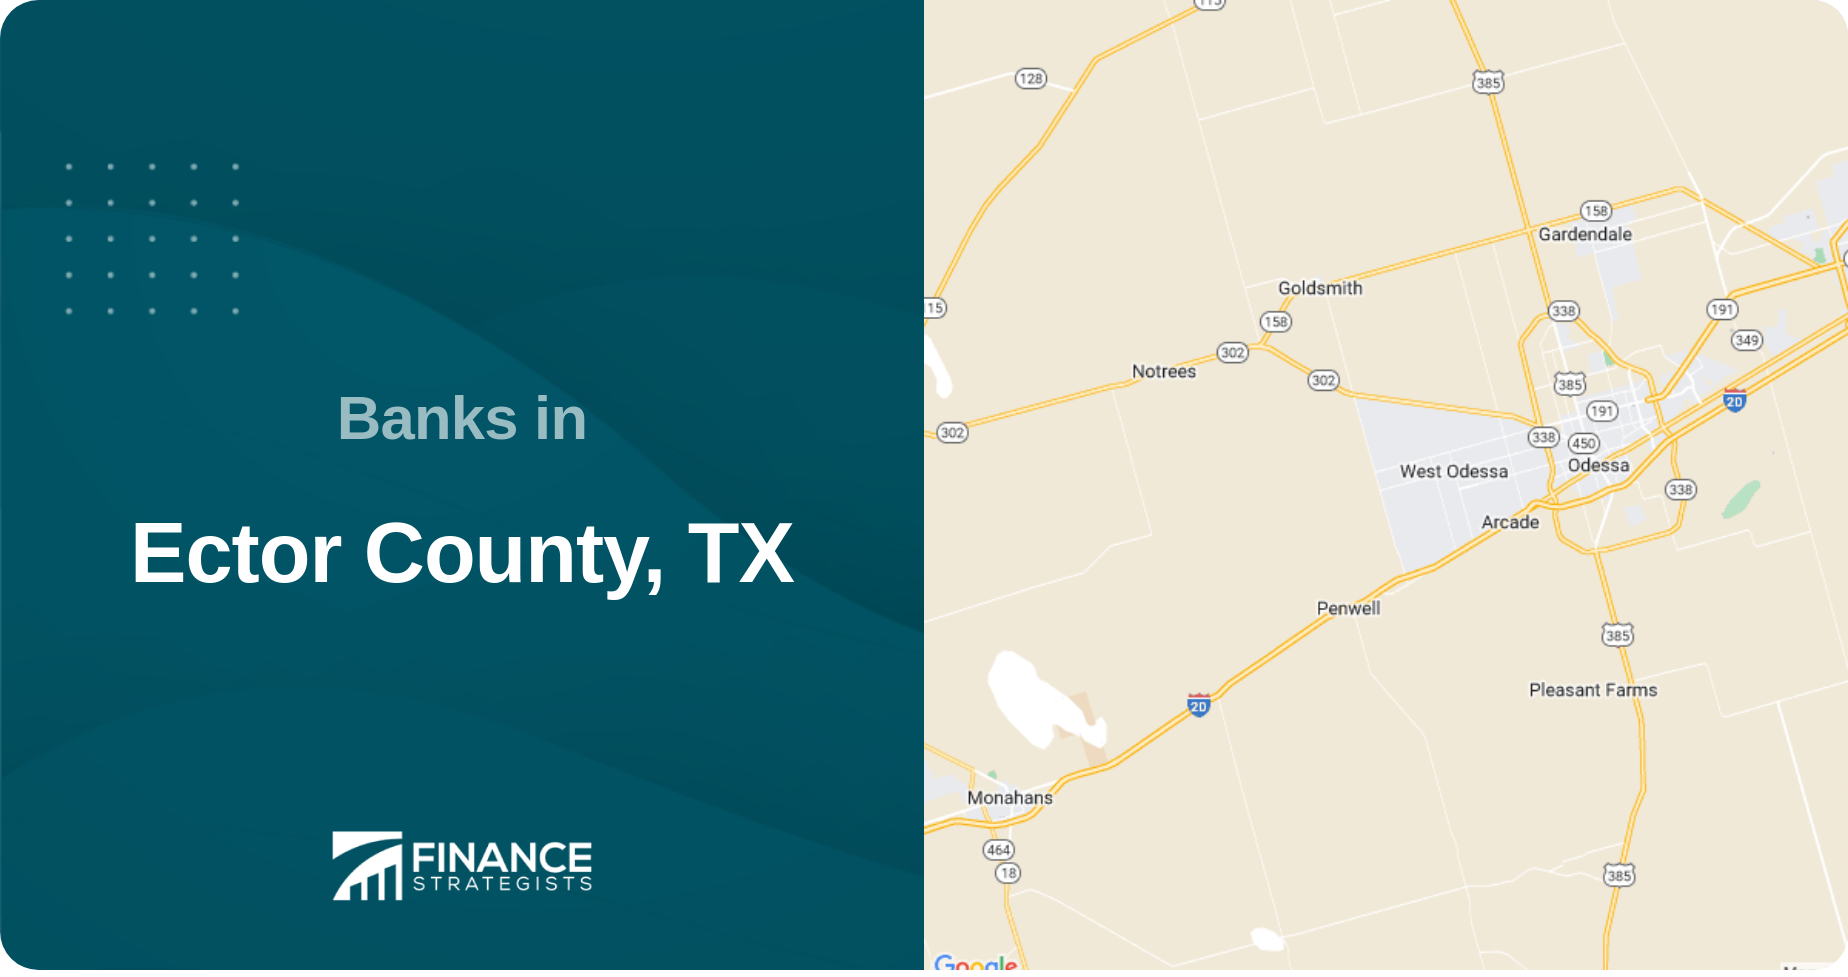 Banks in Ector County, TX